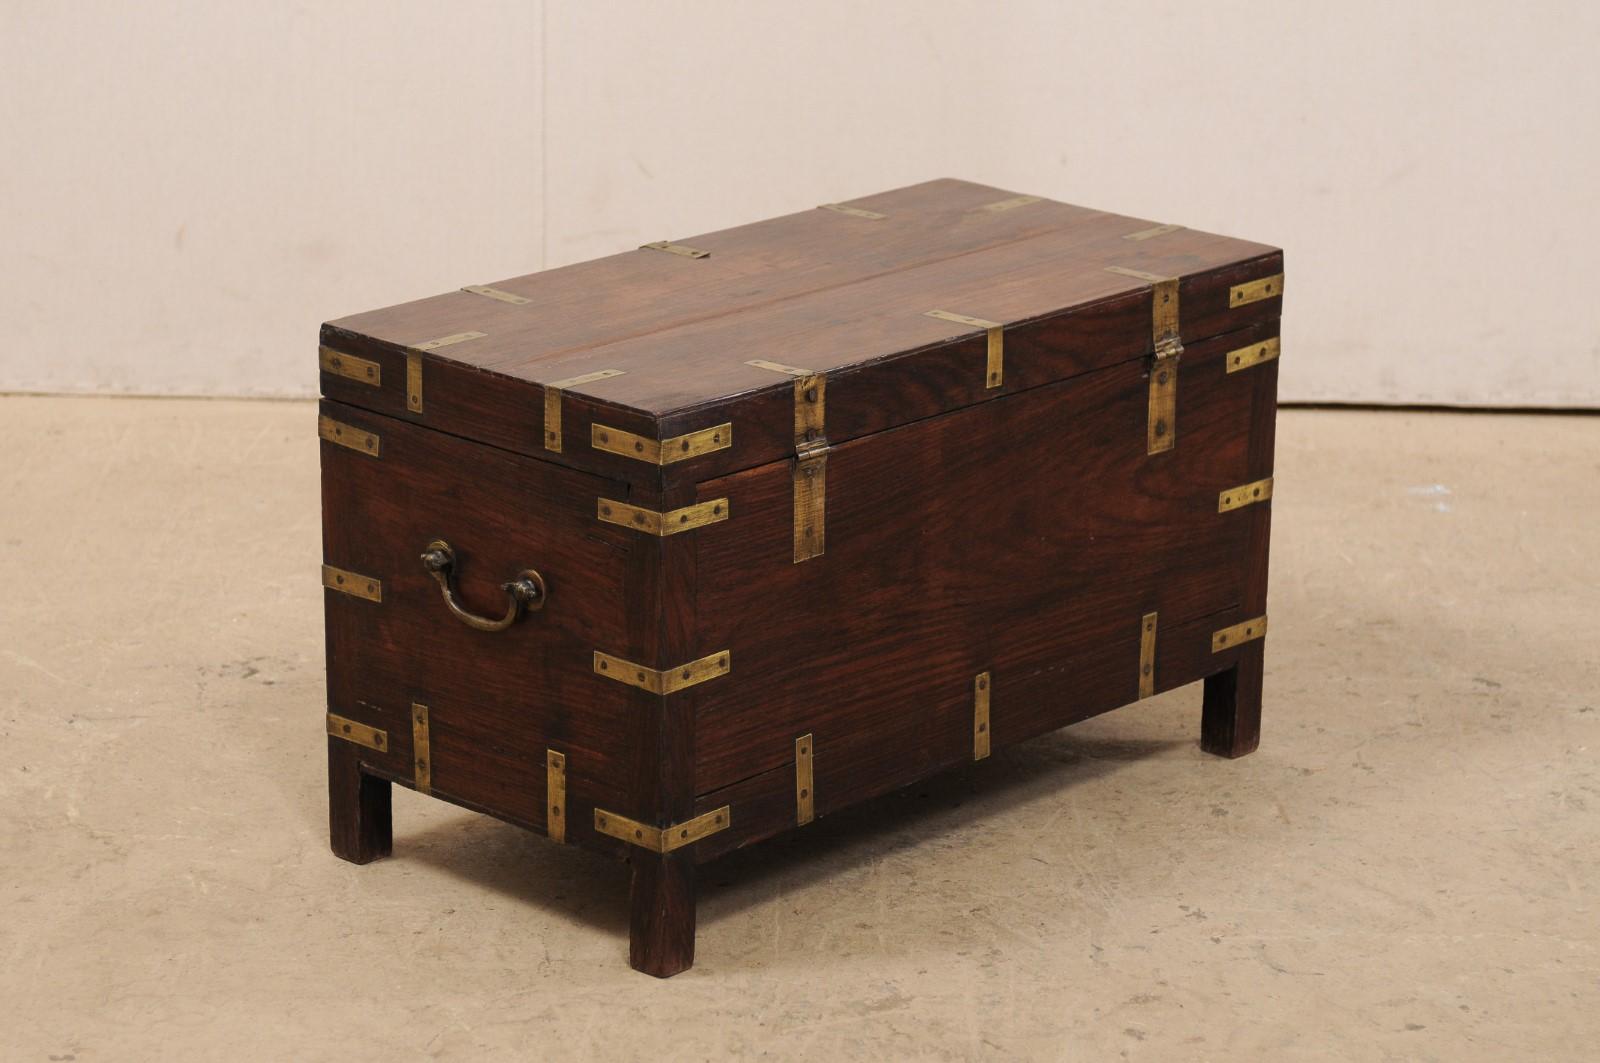 Indian 1920s British Colonial Trunk of Rosewood and Brass-Great Little Coffee Table